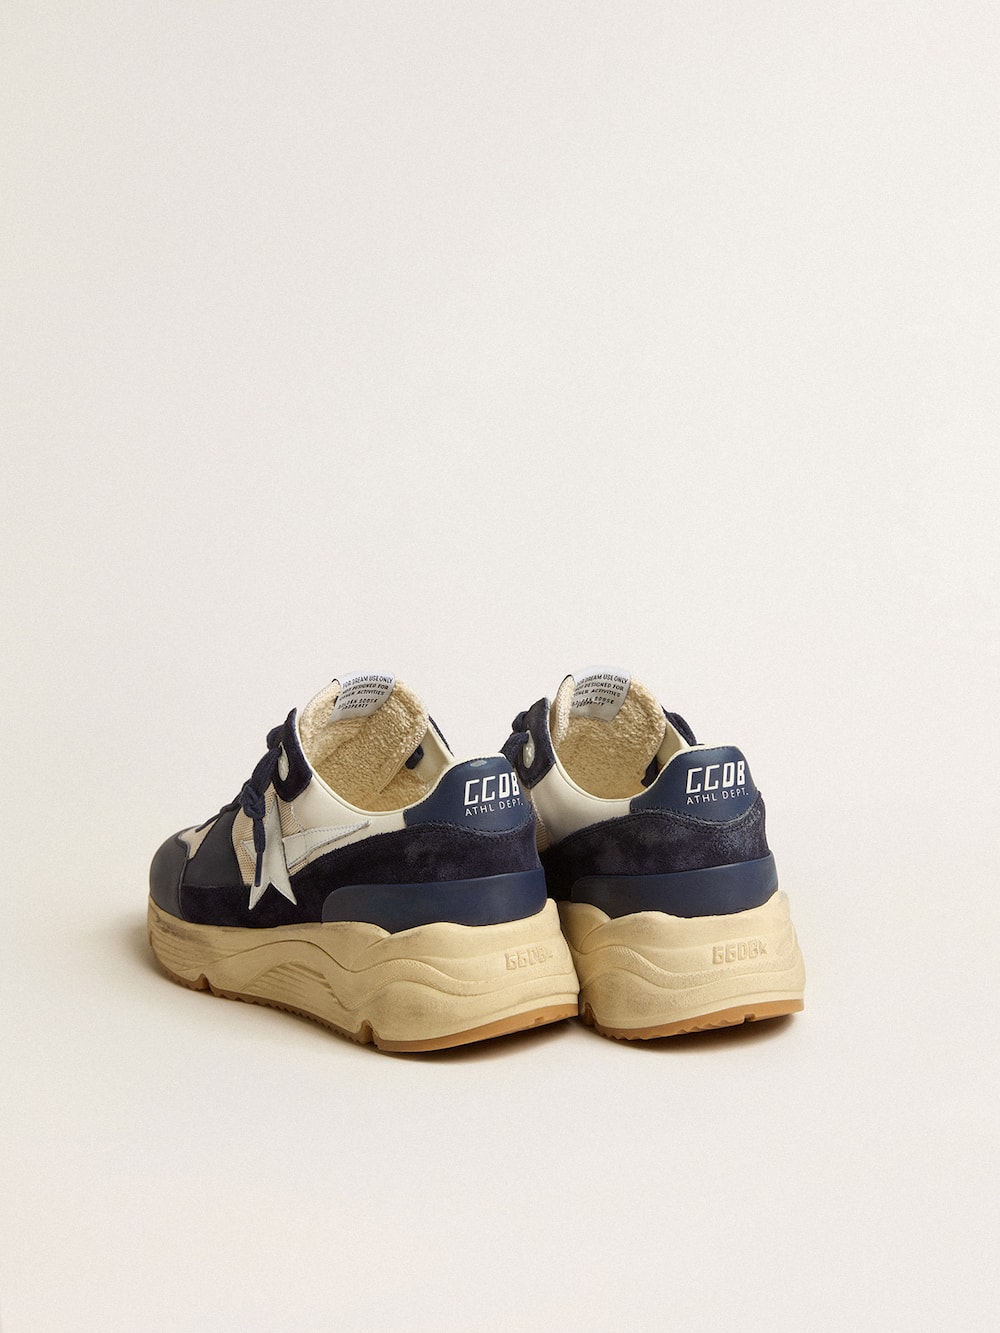 Golden Goose - Running Sole in cream mesh and blue leather with a white leather star in 